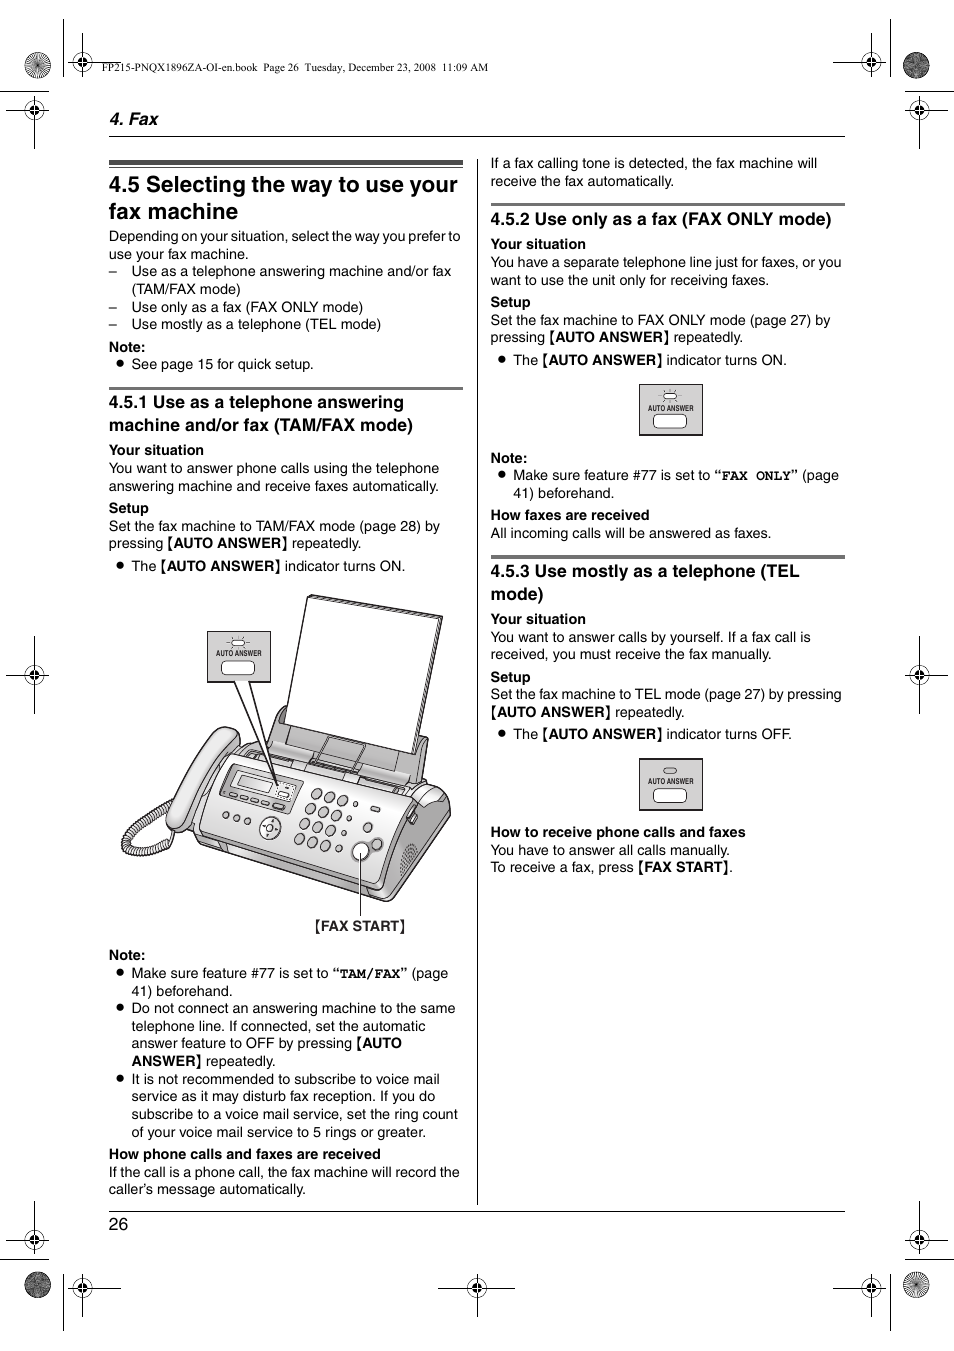 Receiving faxes, 5u00 selecting the way to use your fax machine